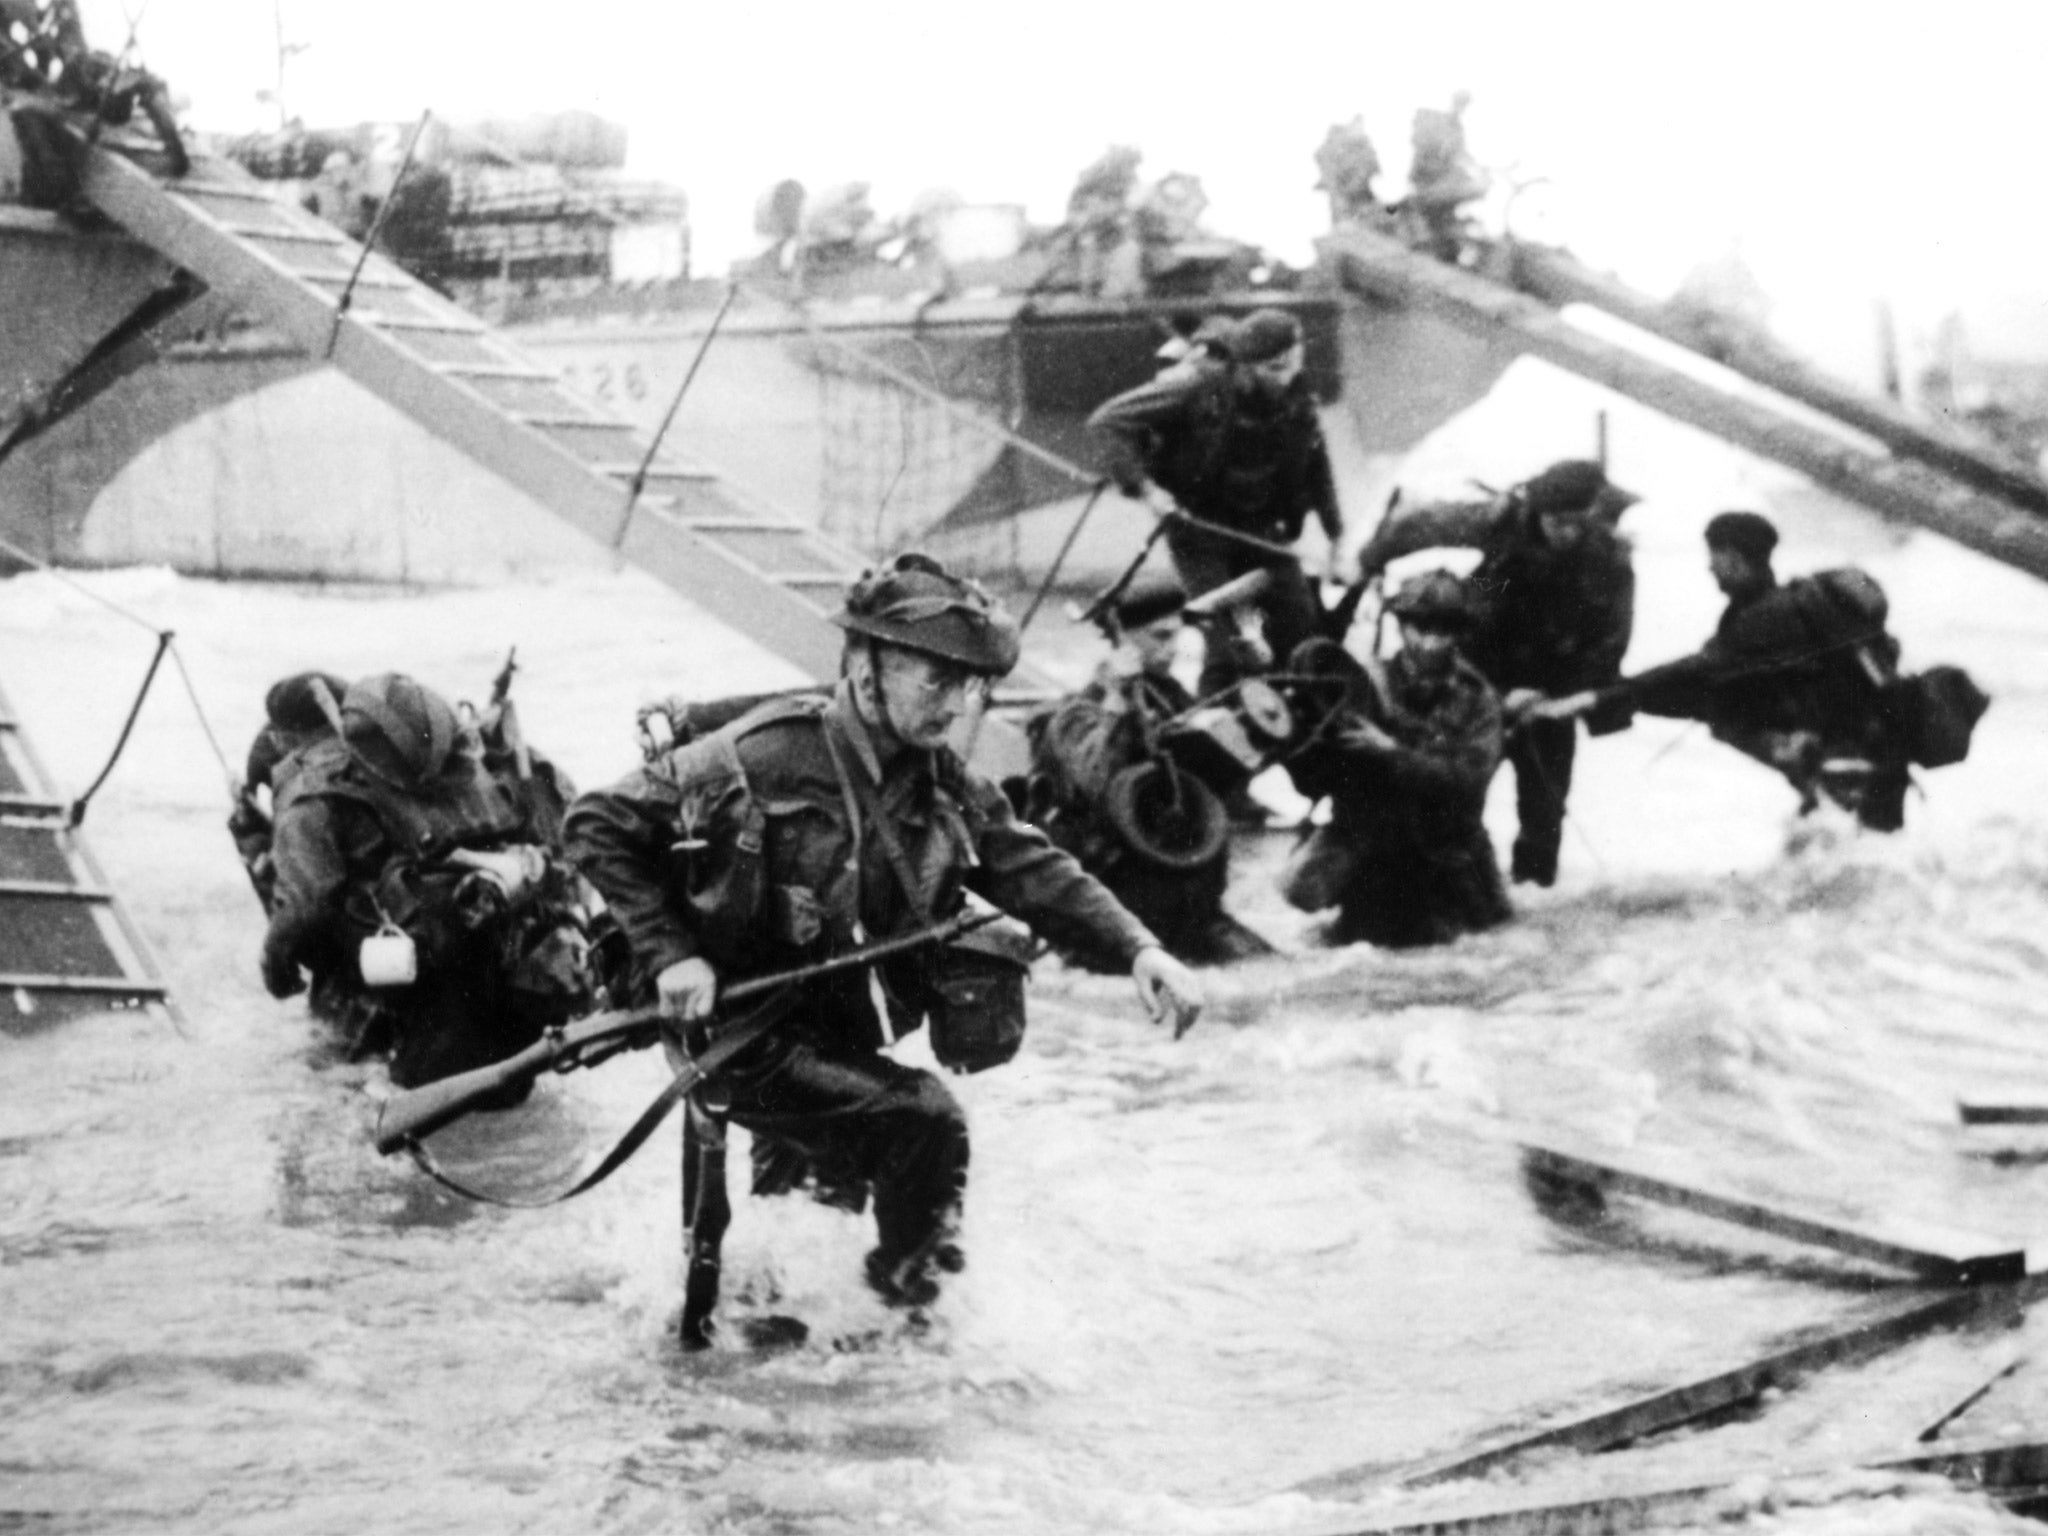 Troops from the 48th Royal Marines on Juno Beach, Normandy, during the D-Day landings on 6 June 1944